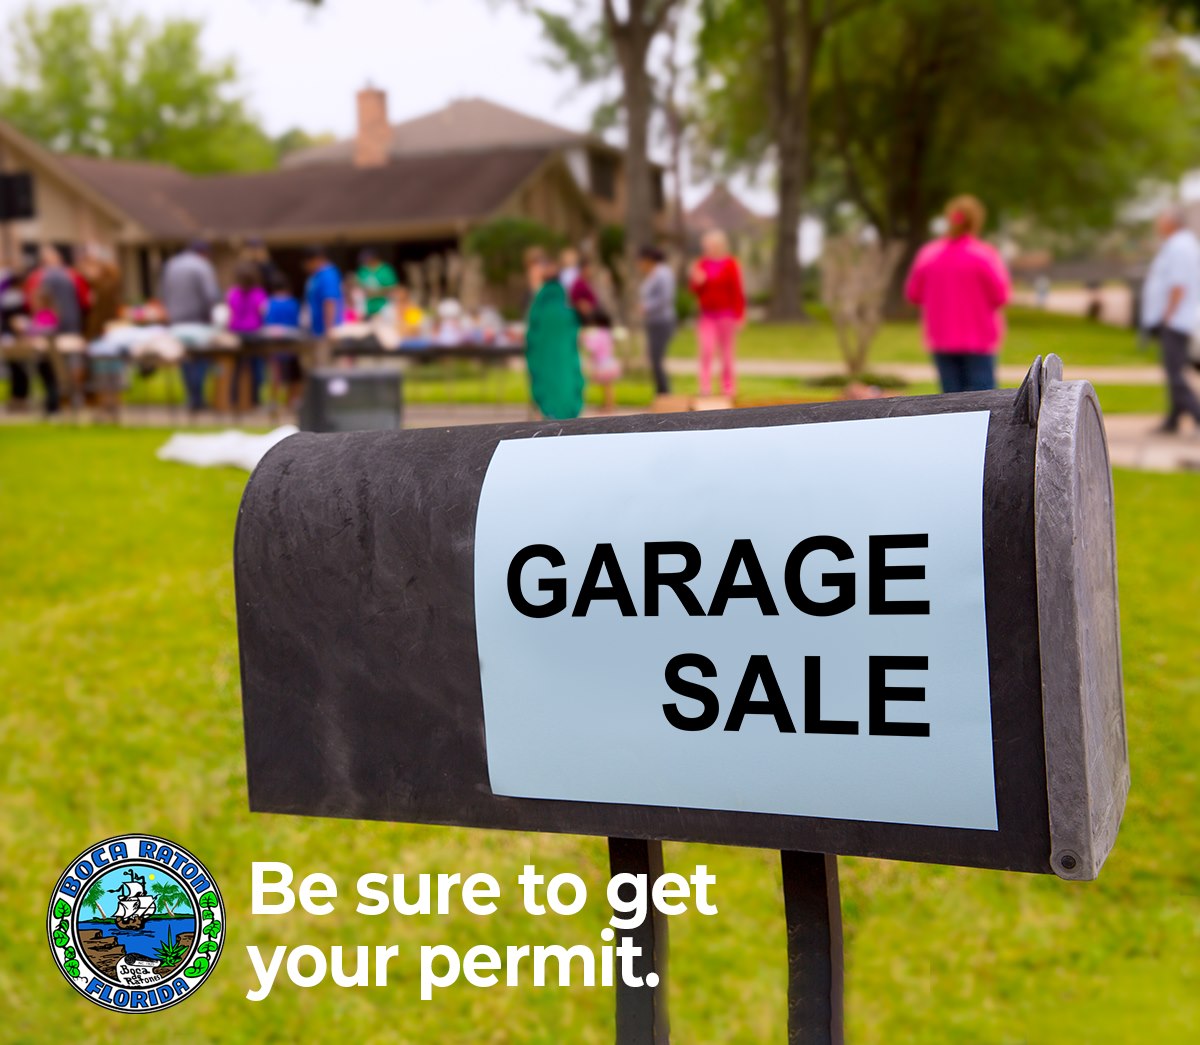 Thinking about having a garage sale or special event within the limits of the City the Boca Raton? Here's your friendly reminder to remember to get your permit! Residents can fill out an application ONLINE and permits are typically approved by email within 24 hours, Monday -